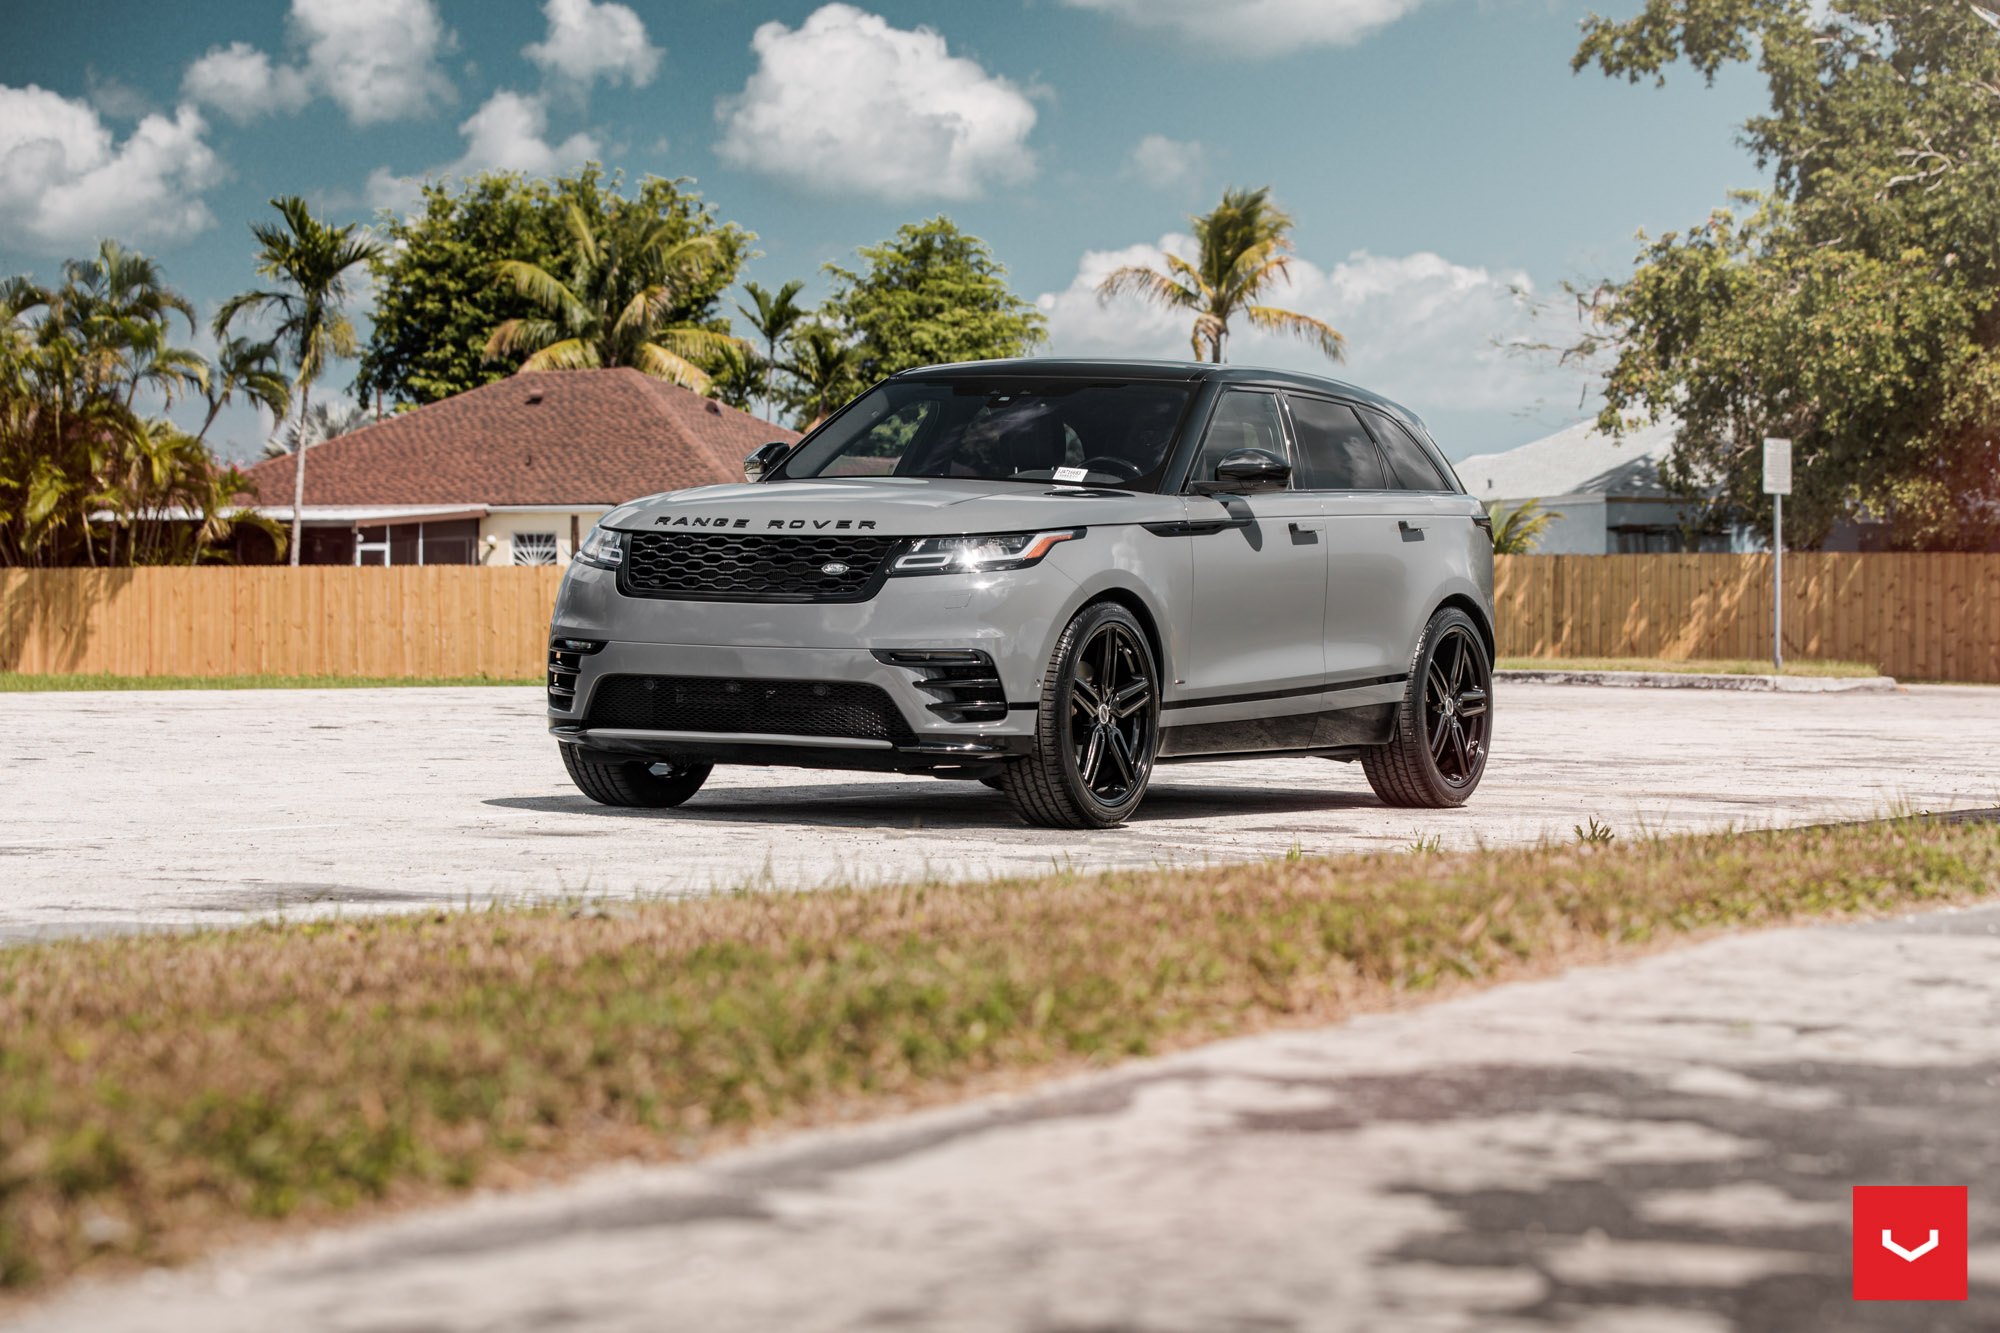 Gray Range Rover Velar with Aftermarket Front Bumper - Photo by Vossen